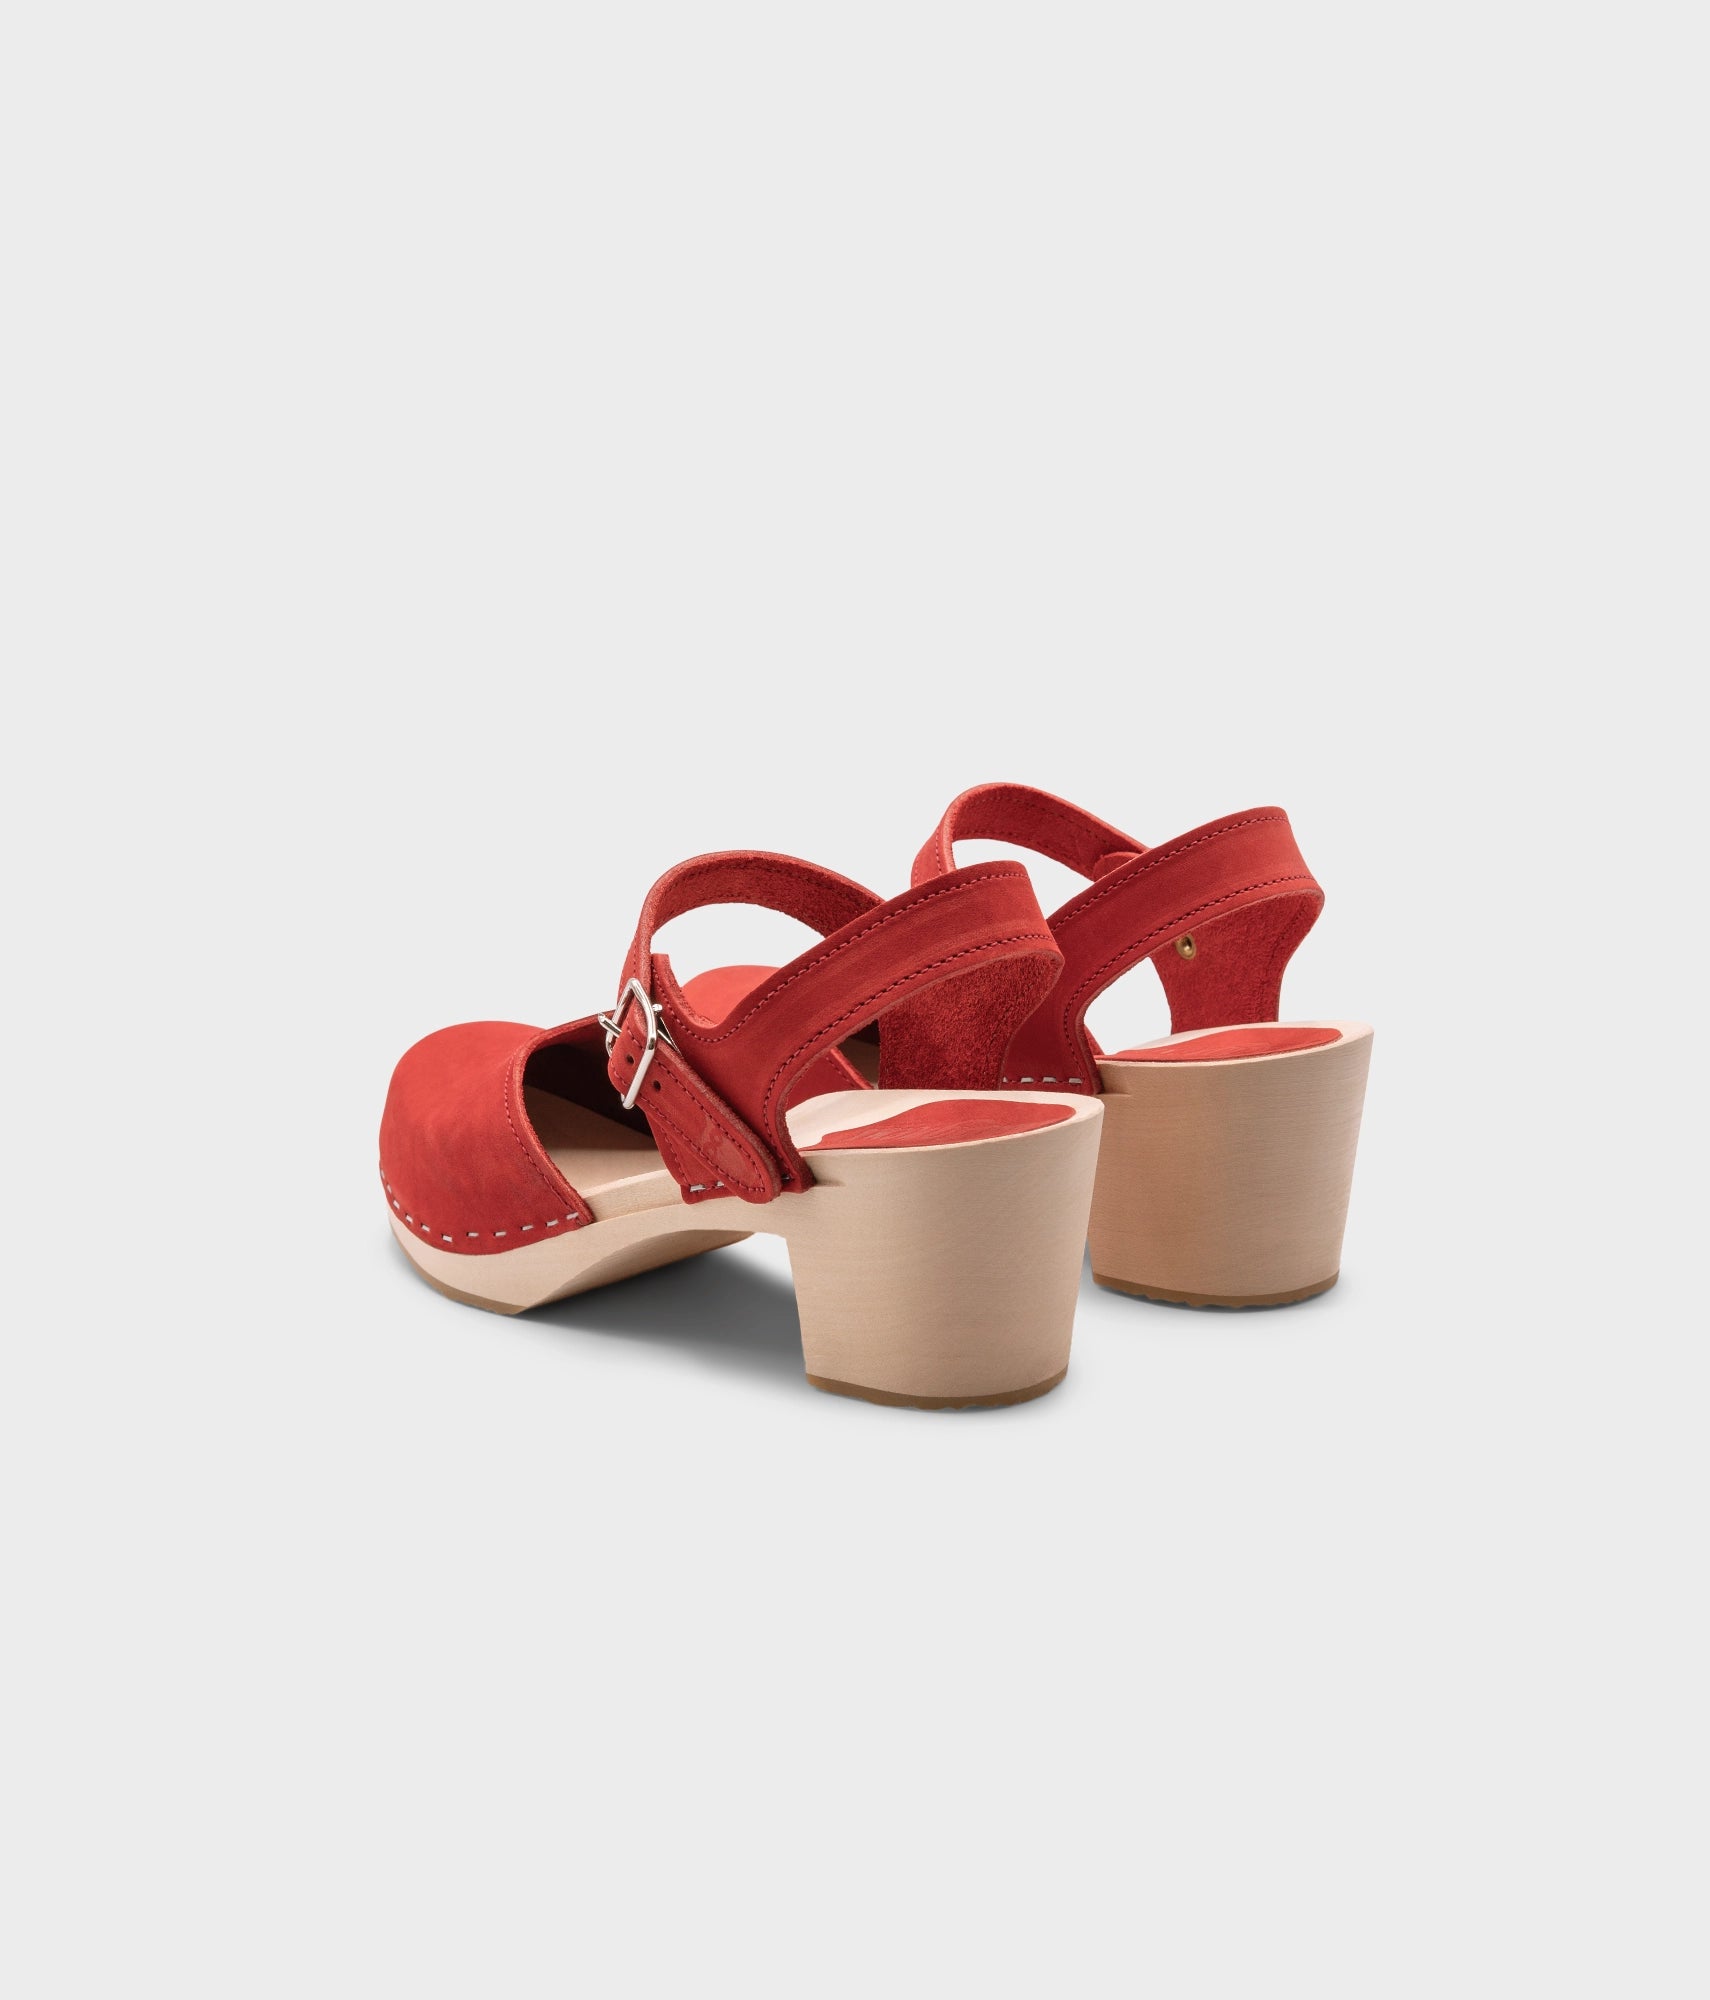 high heeled closed-toe clog sandal in red nubuck leather stapled on a light wooden base